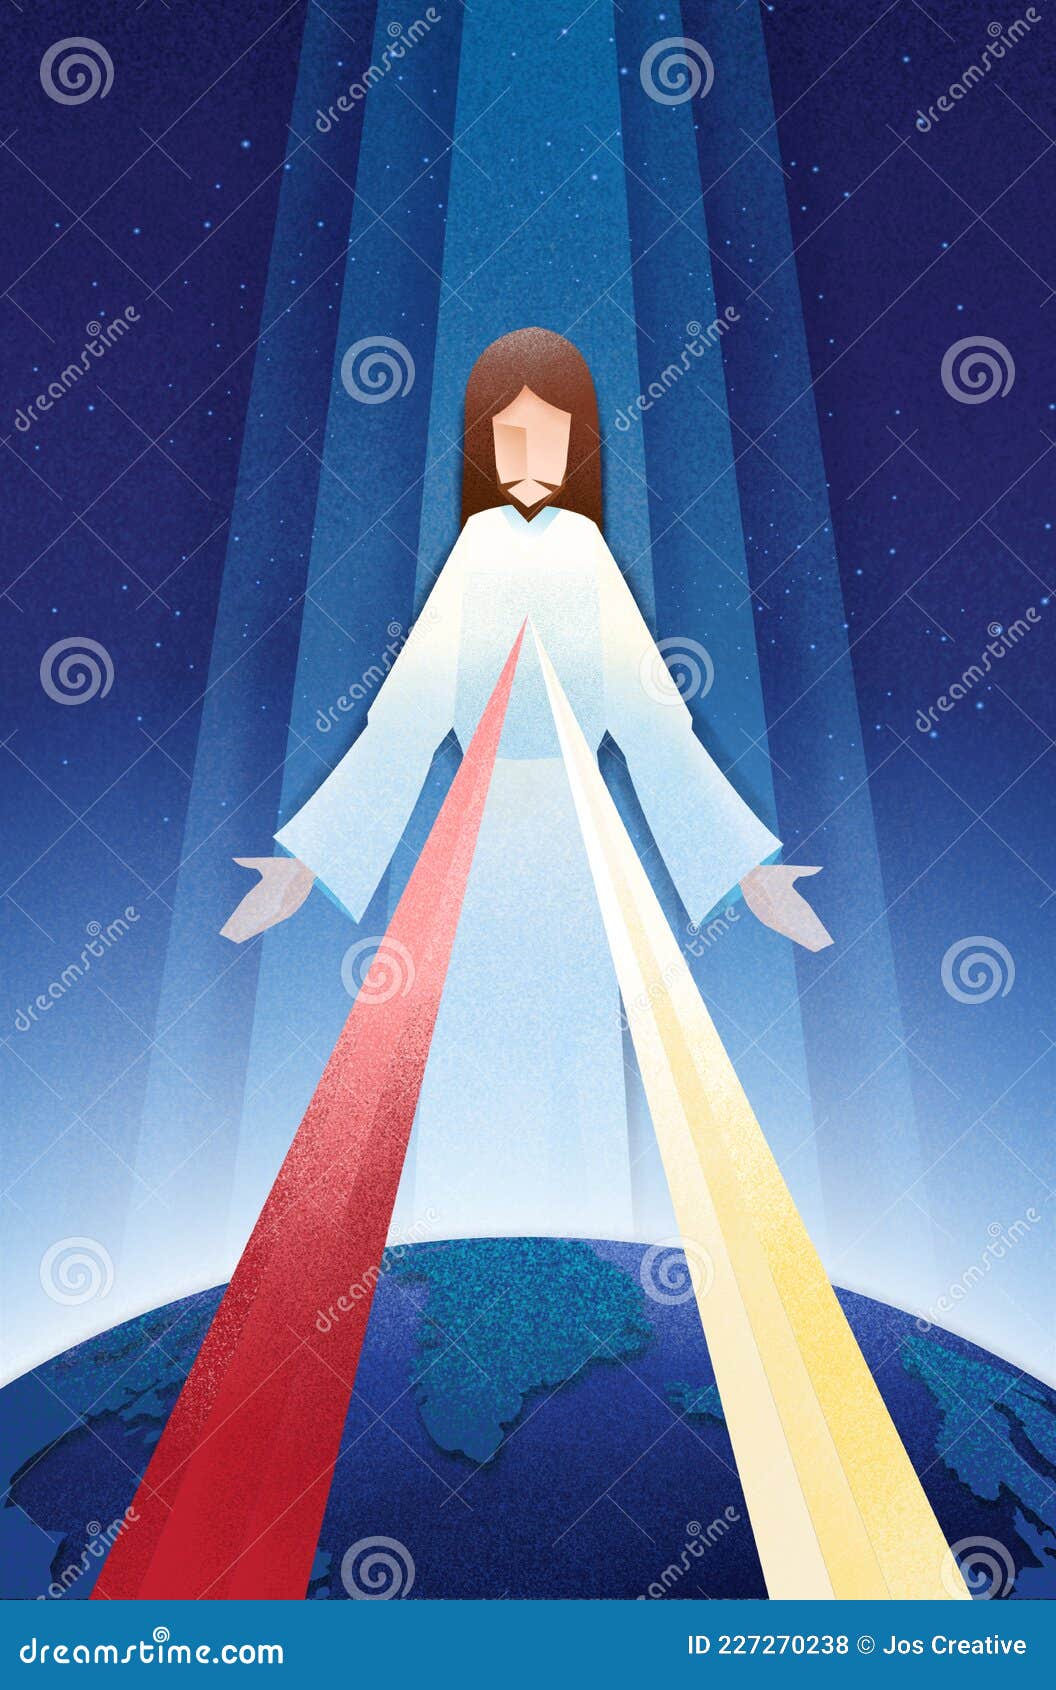 jesus divine mercy love the earth protect the earth jesus grace merciful and compassion